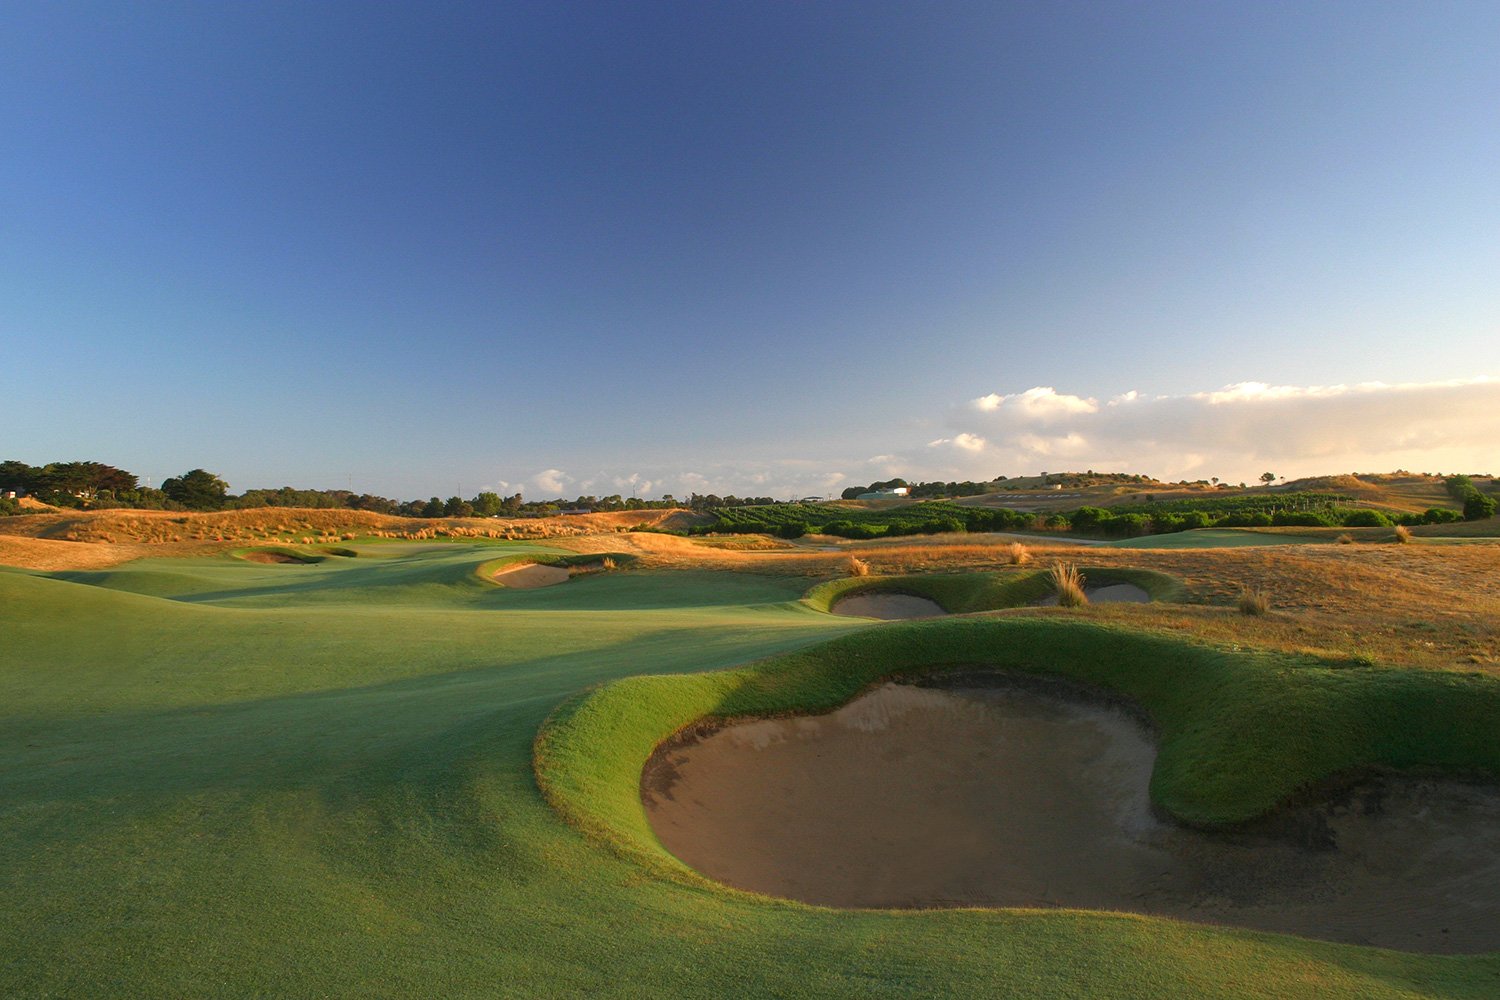 The Open course at Moonah Links has twice staged the Australian Open.